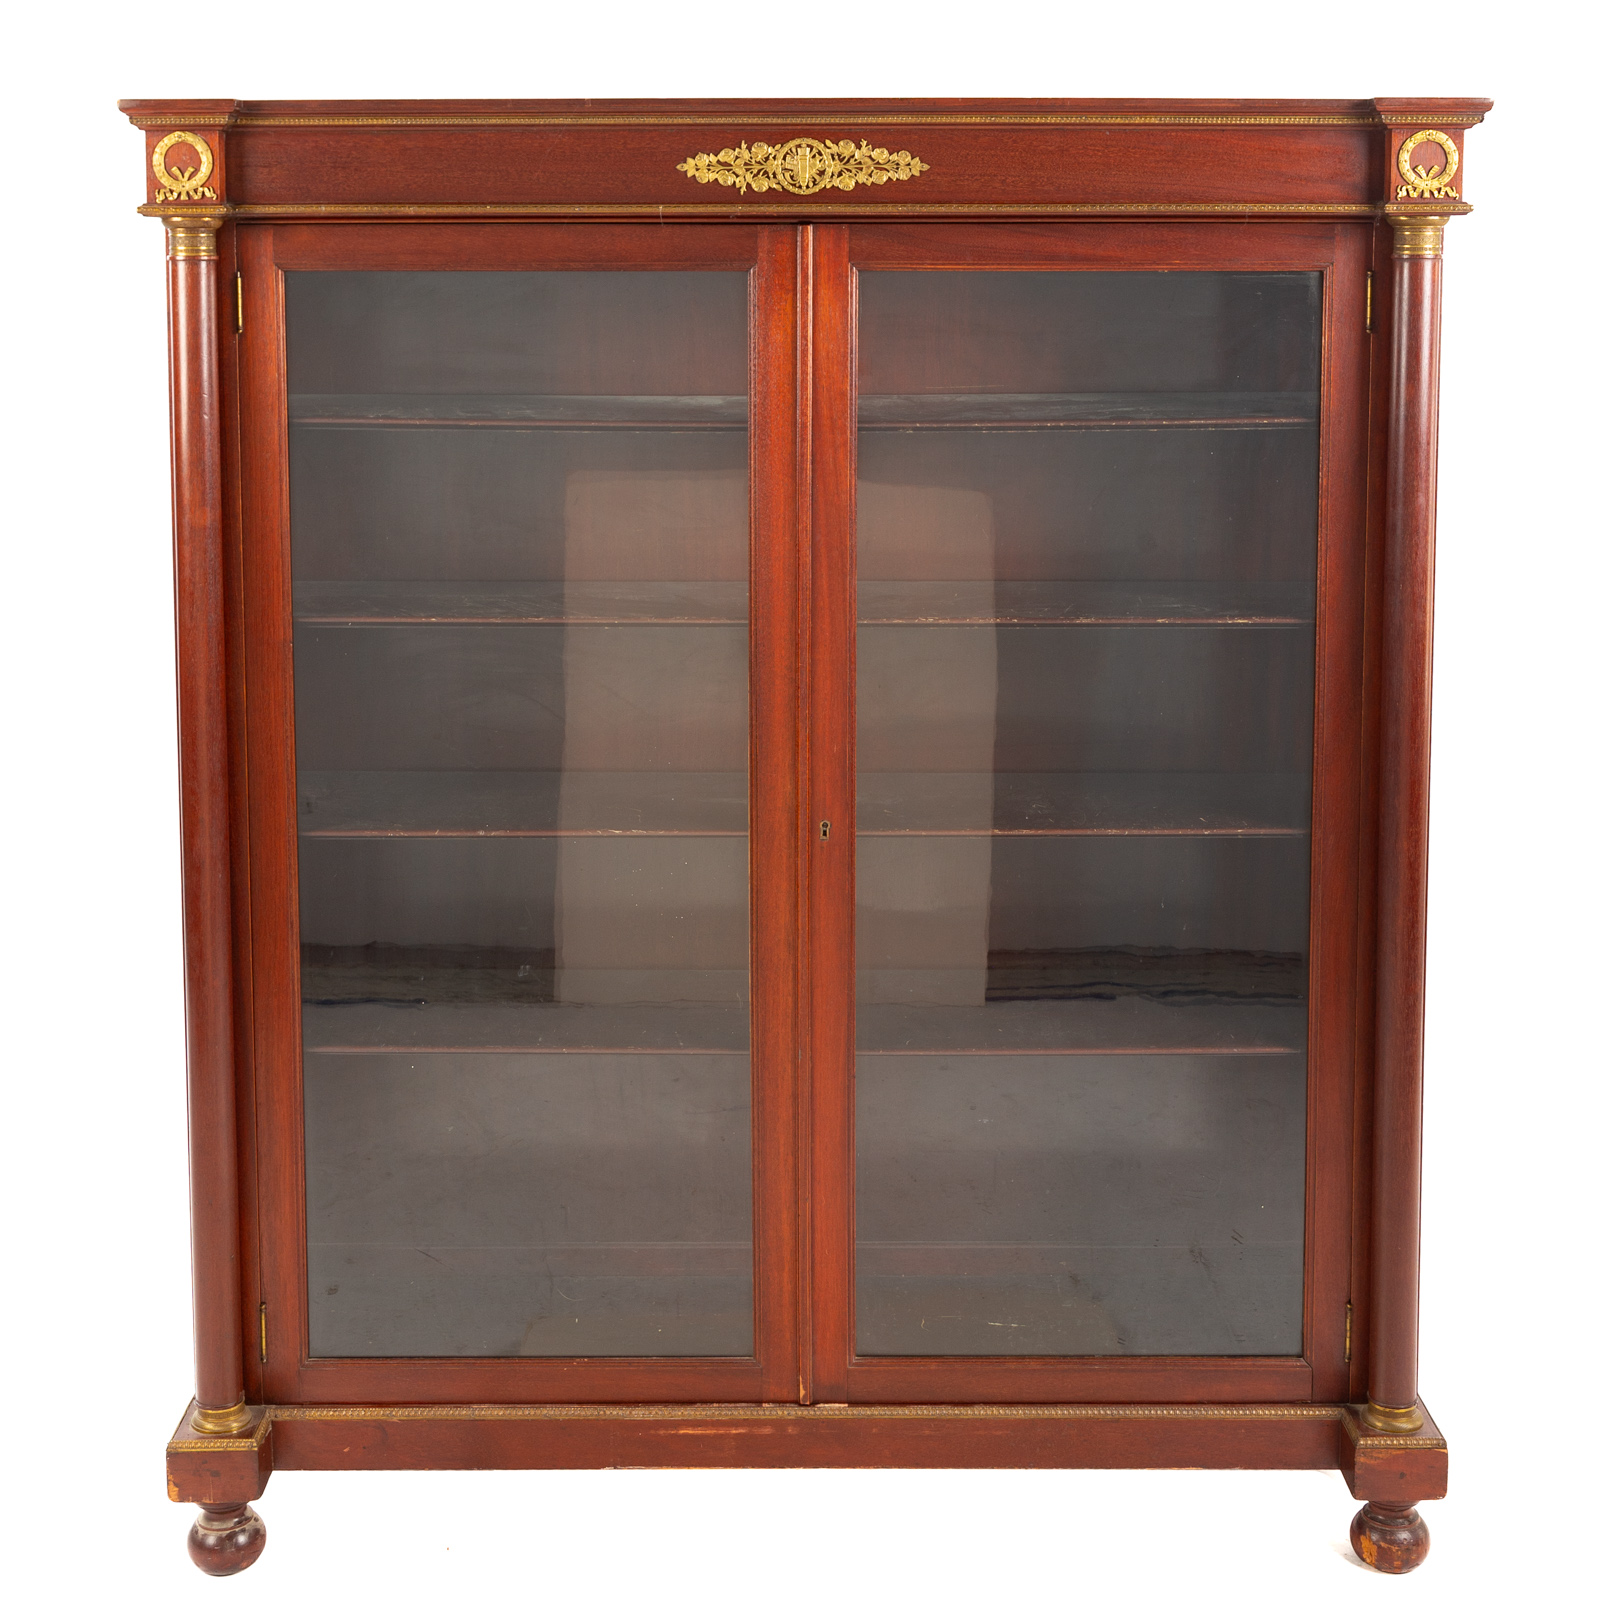 FRENCH EMPIRE STYLE BOOKCASE Early